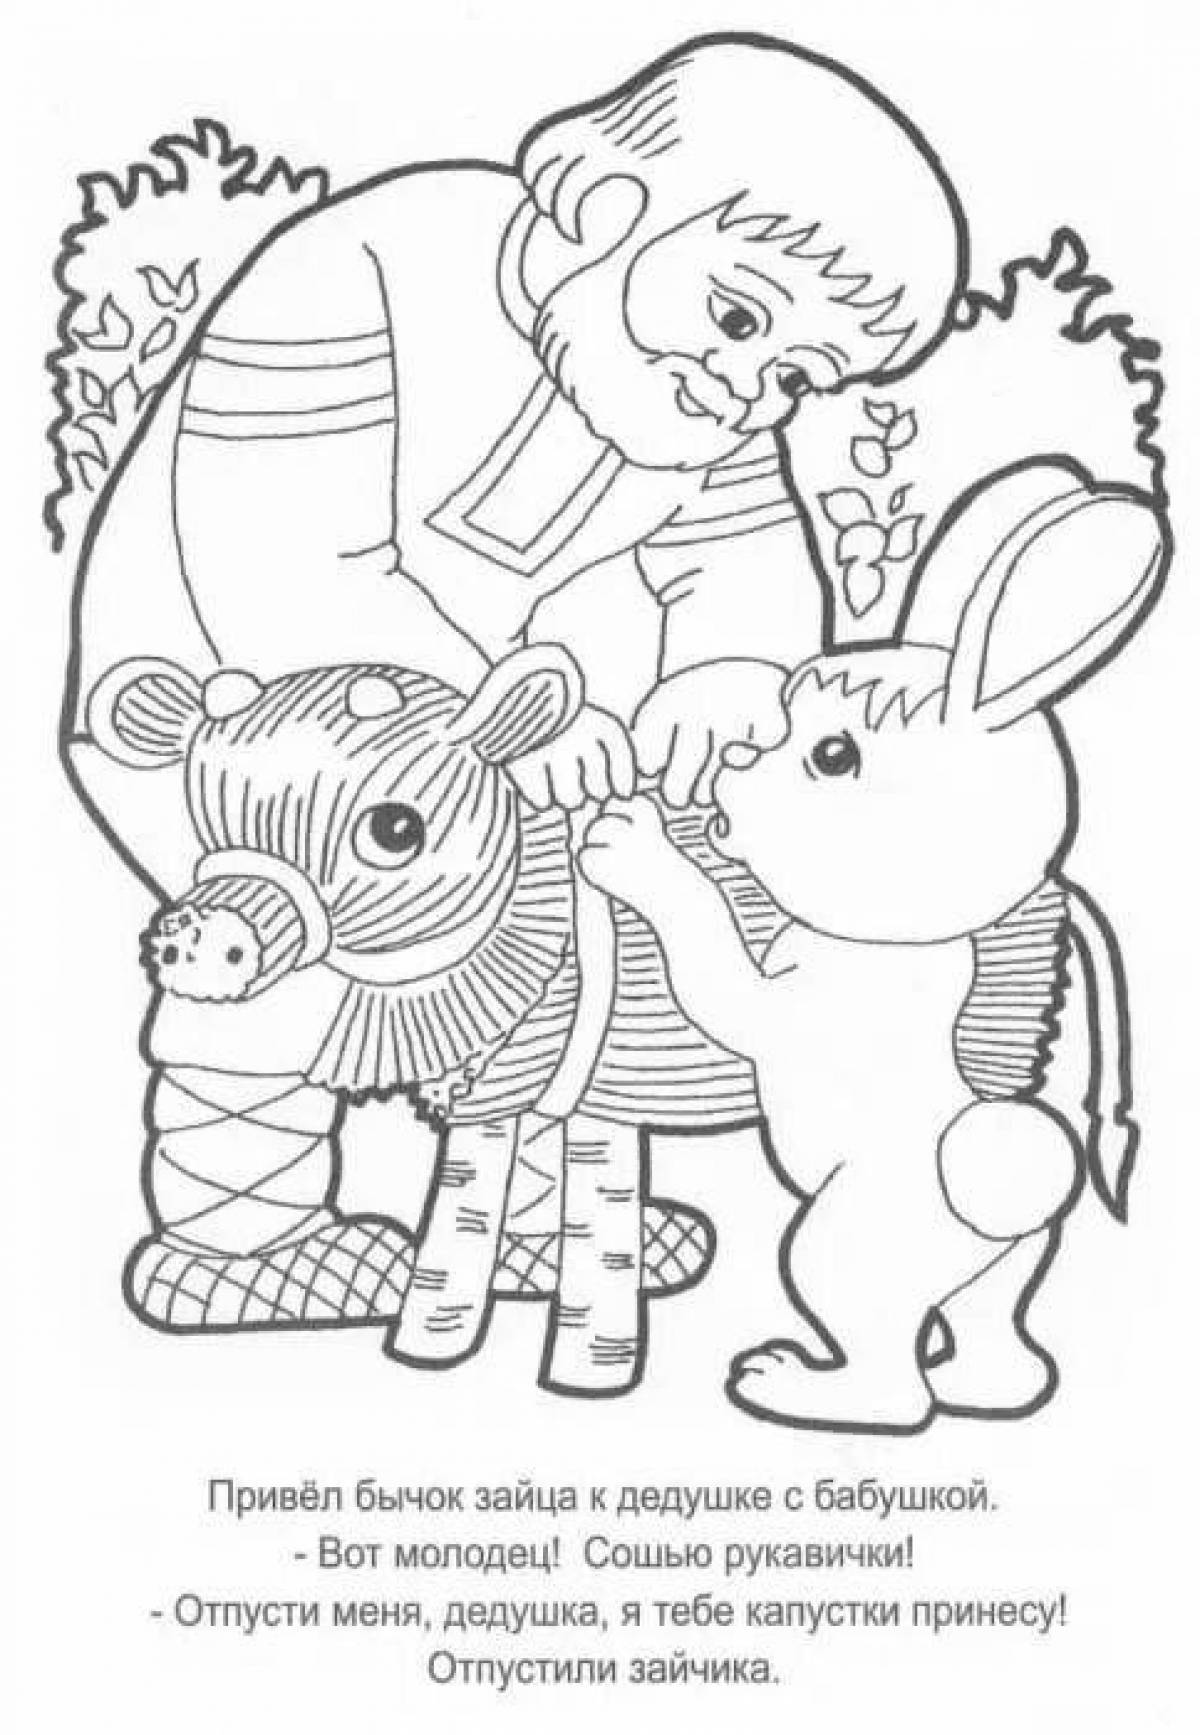 Witty polymer goby coloring page